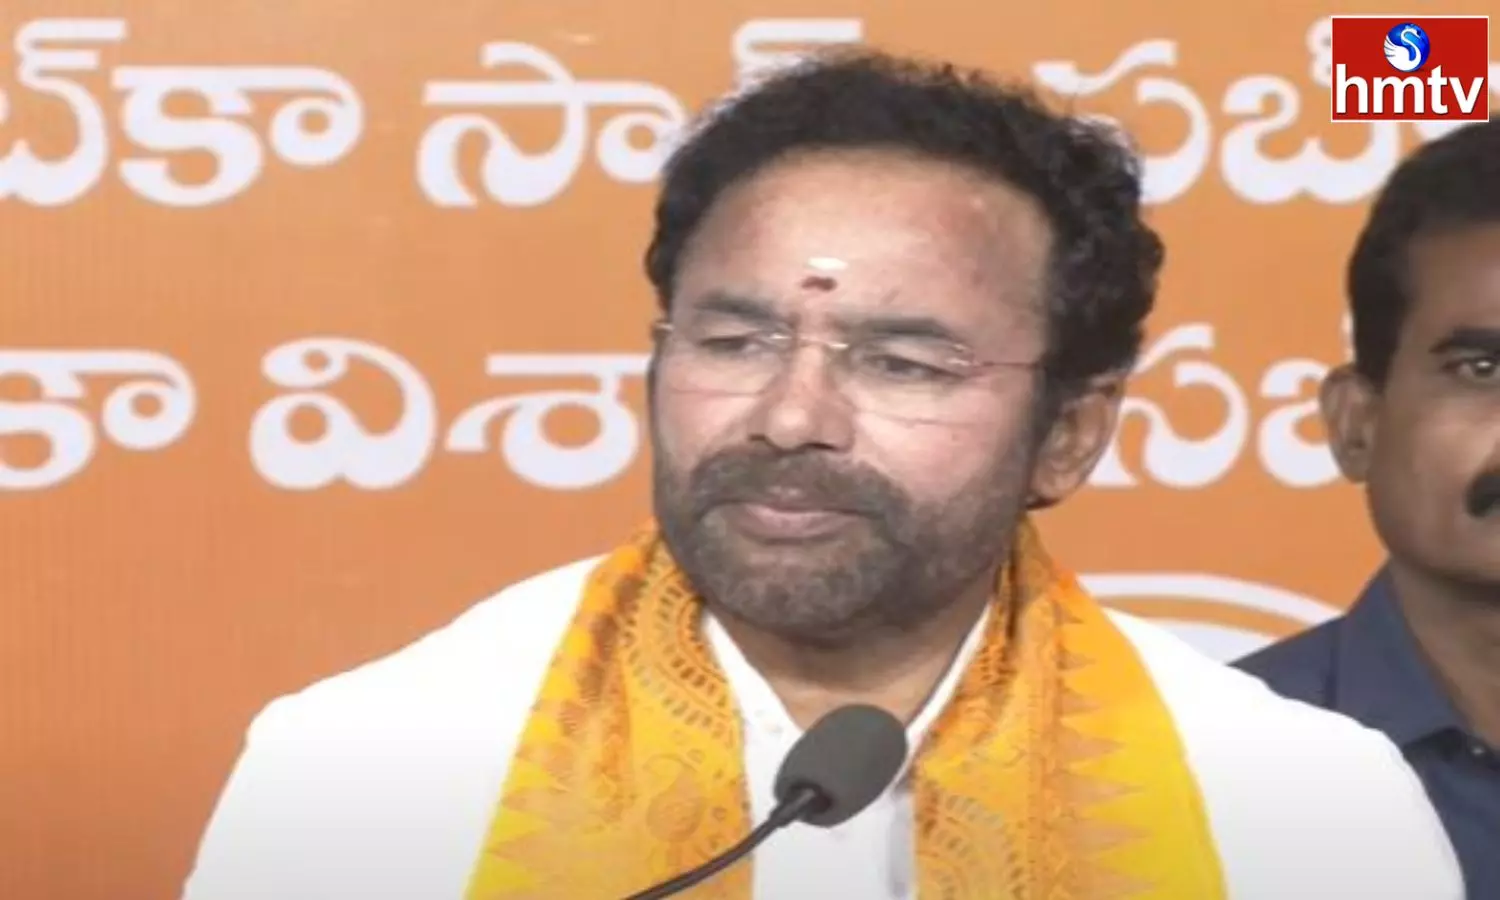 A call from the high command to Union Minister Kishan Reddy